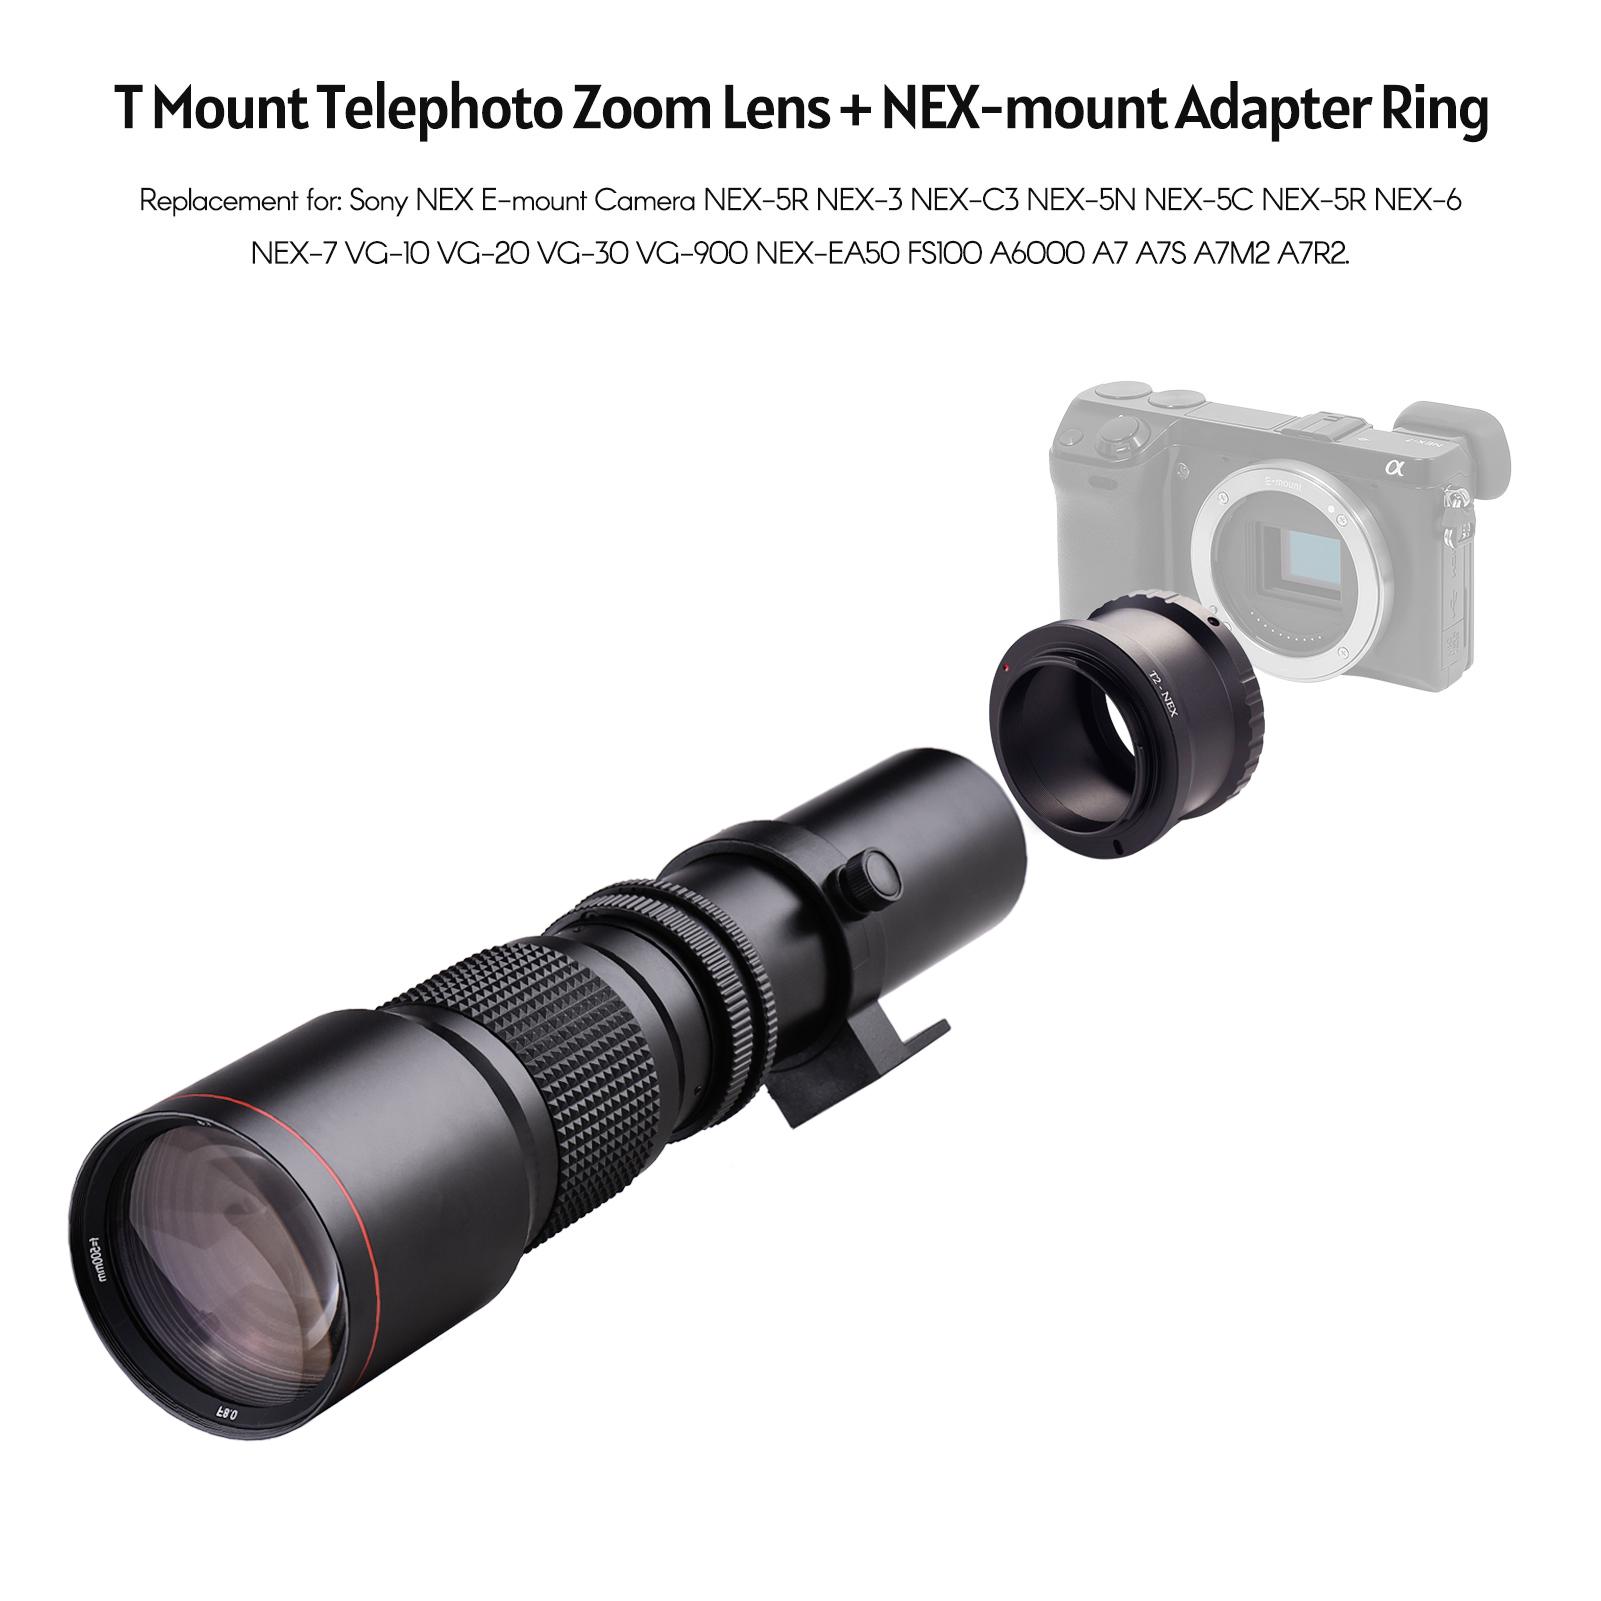 500mm F/8.0-32 Multi Coated Super Telephoto Lens Manual Zoom + T-Mount to NEX E-Mount Adapter Ring Kit Replacement for